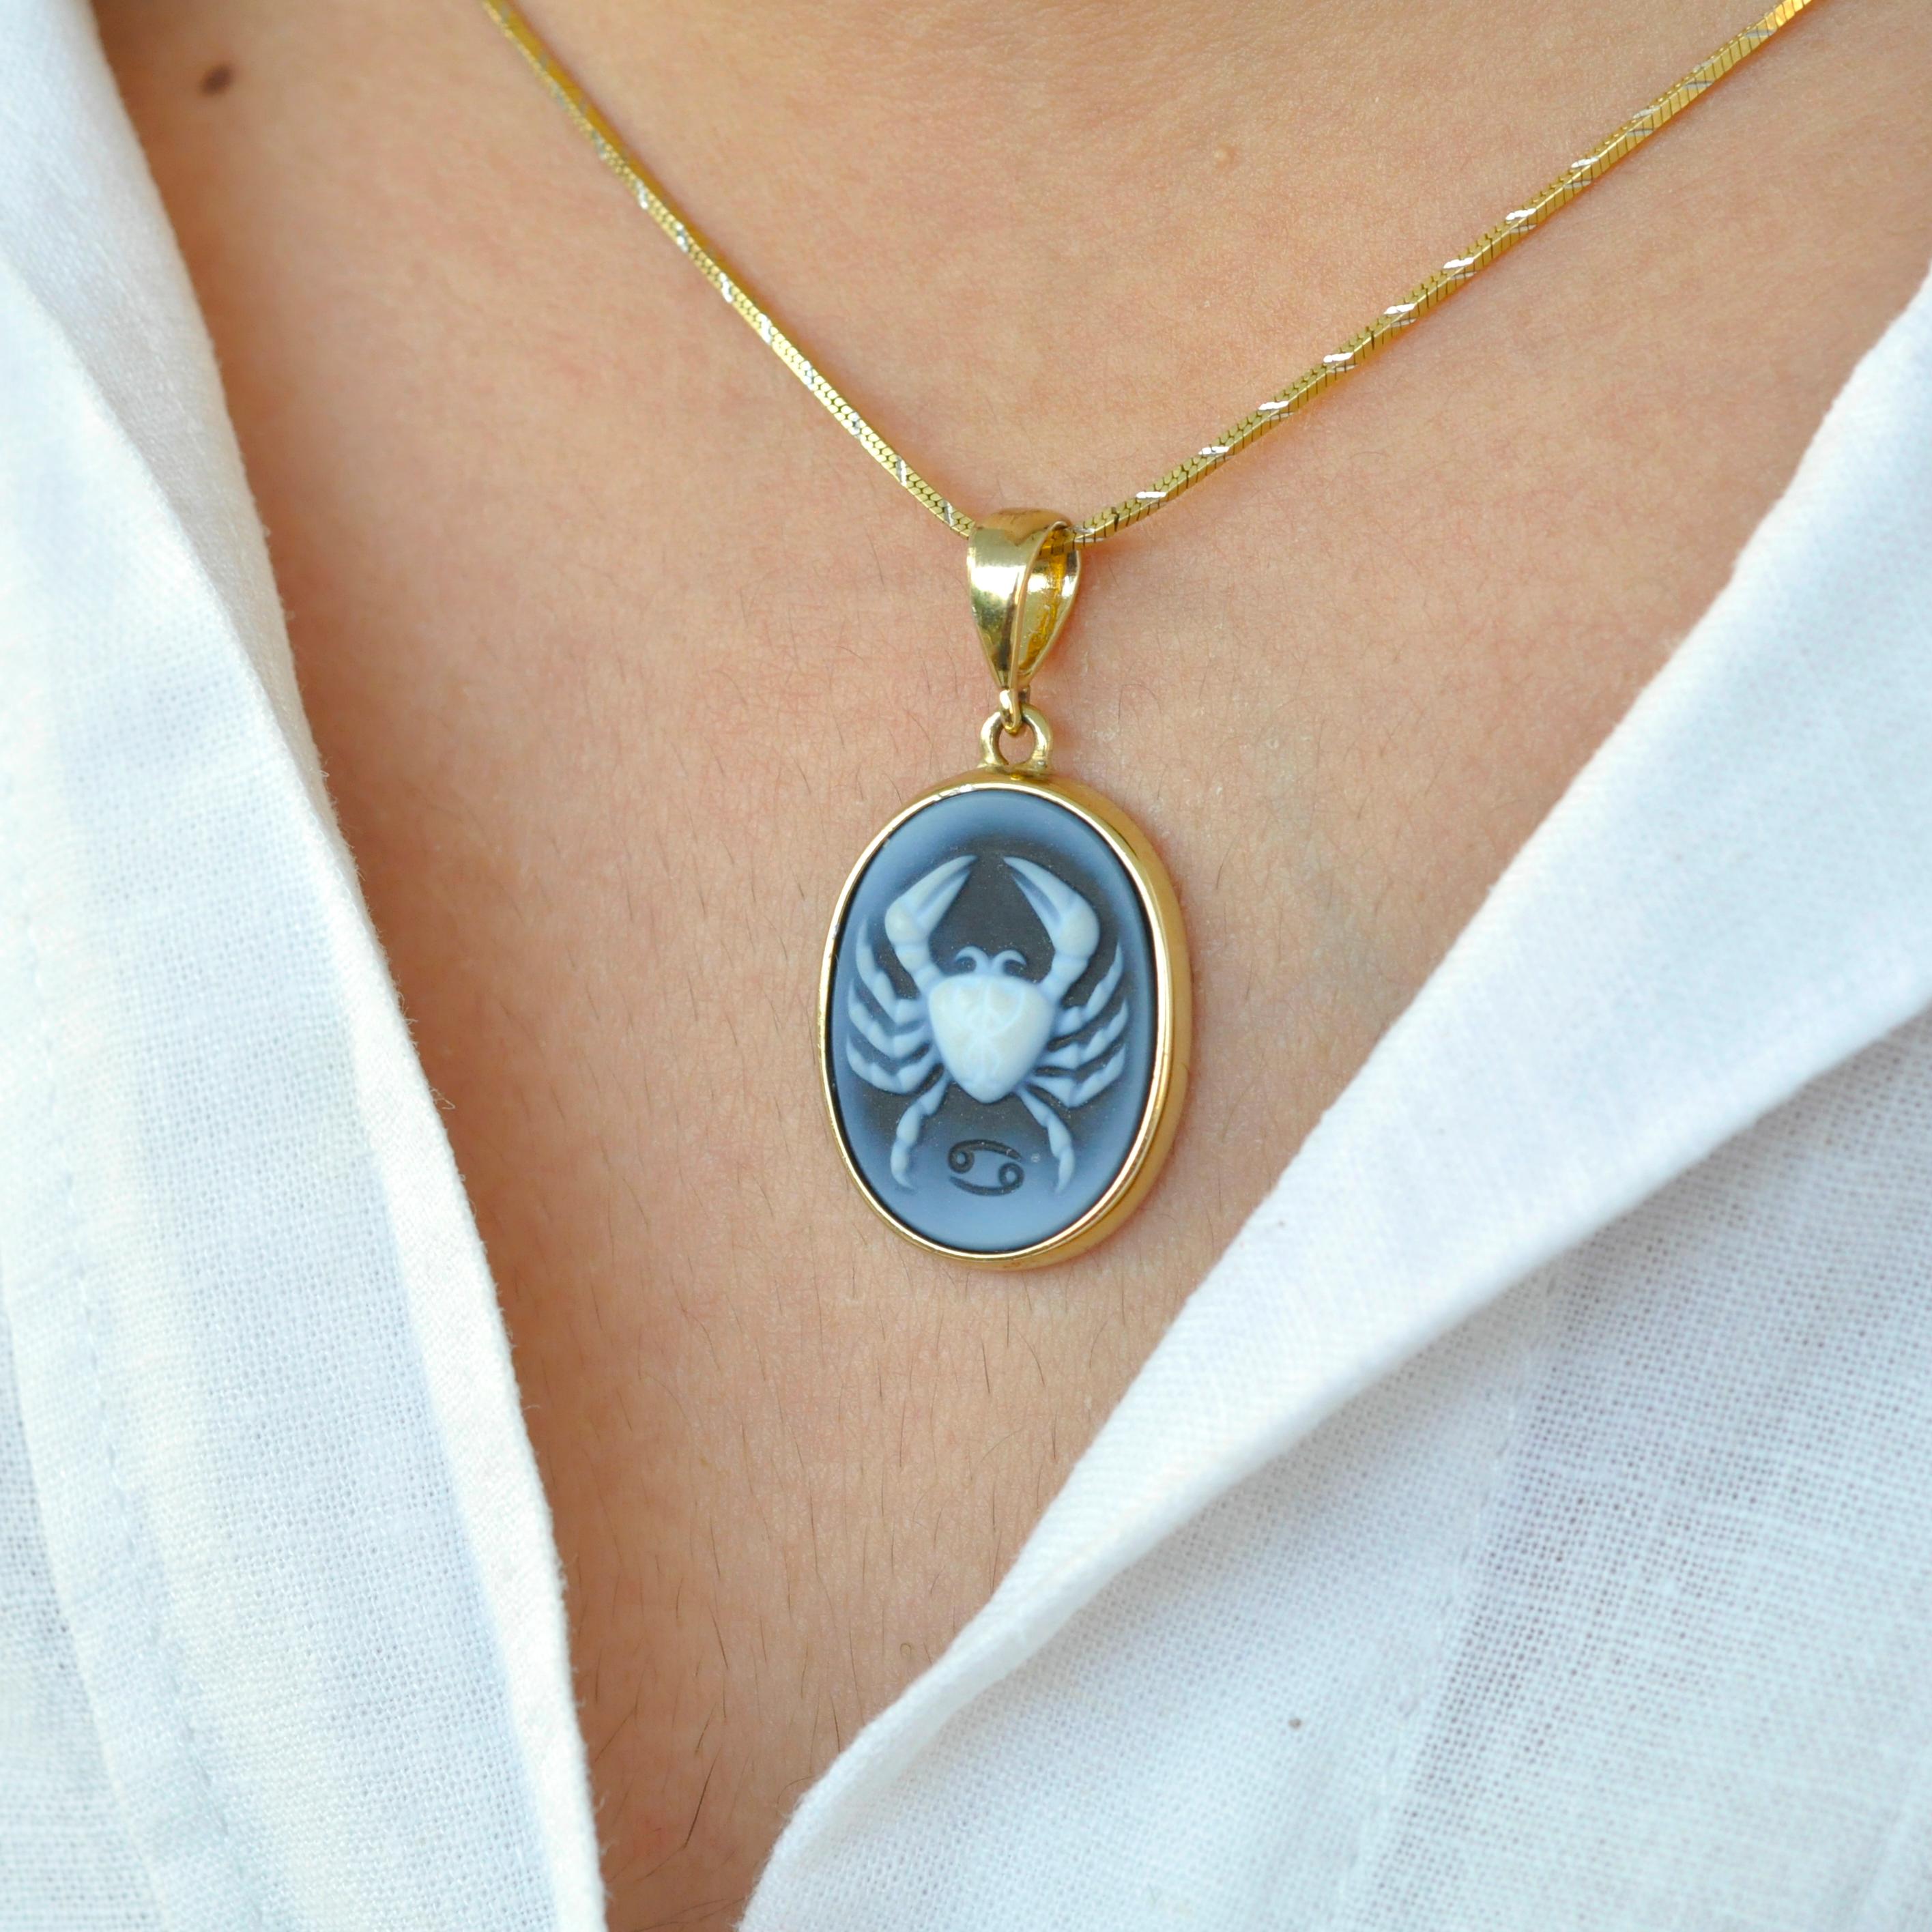 The Cancer zodiac carving cameo pendant necklace from the Zodiac Collection is a stunning piece of jewelry that showcases the intricate craftsmanship and attention to detail. The pendant features the Cancer zodiac sign, which is represented by the